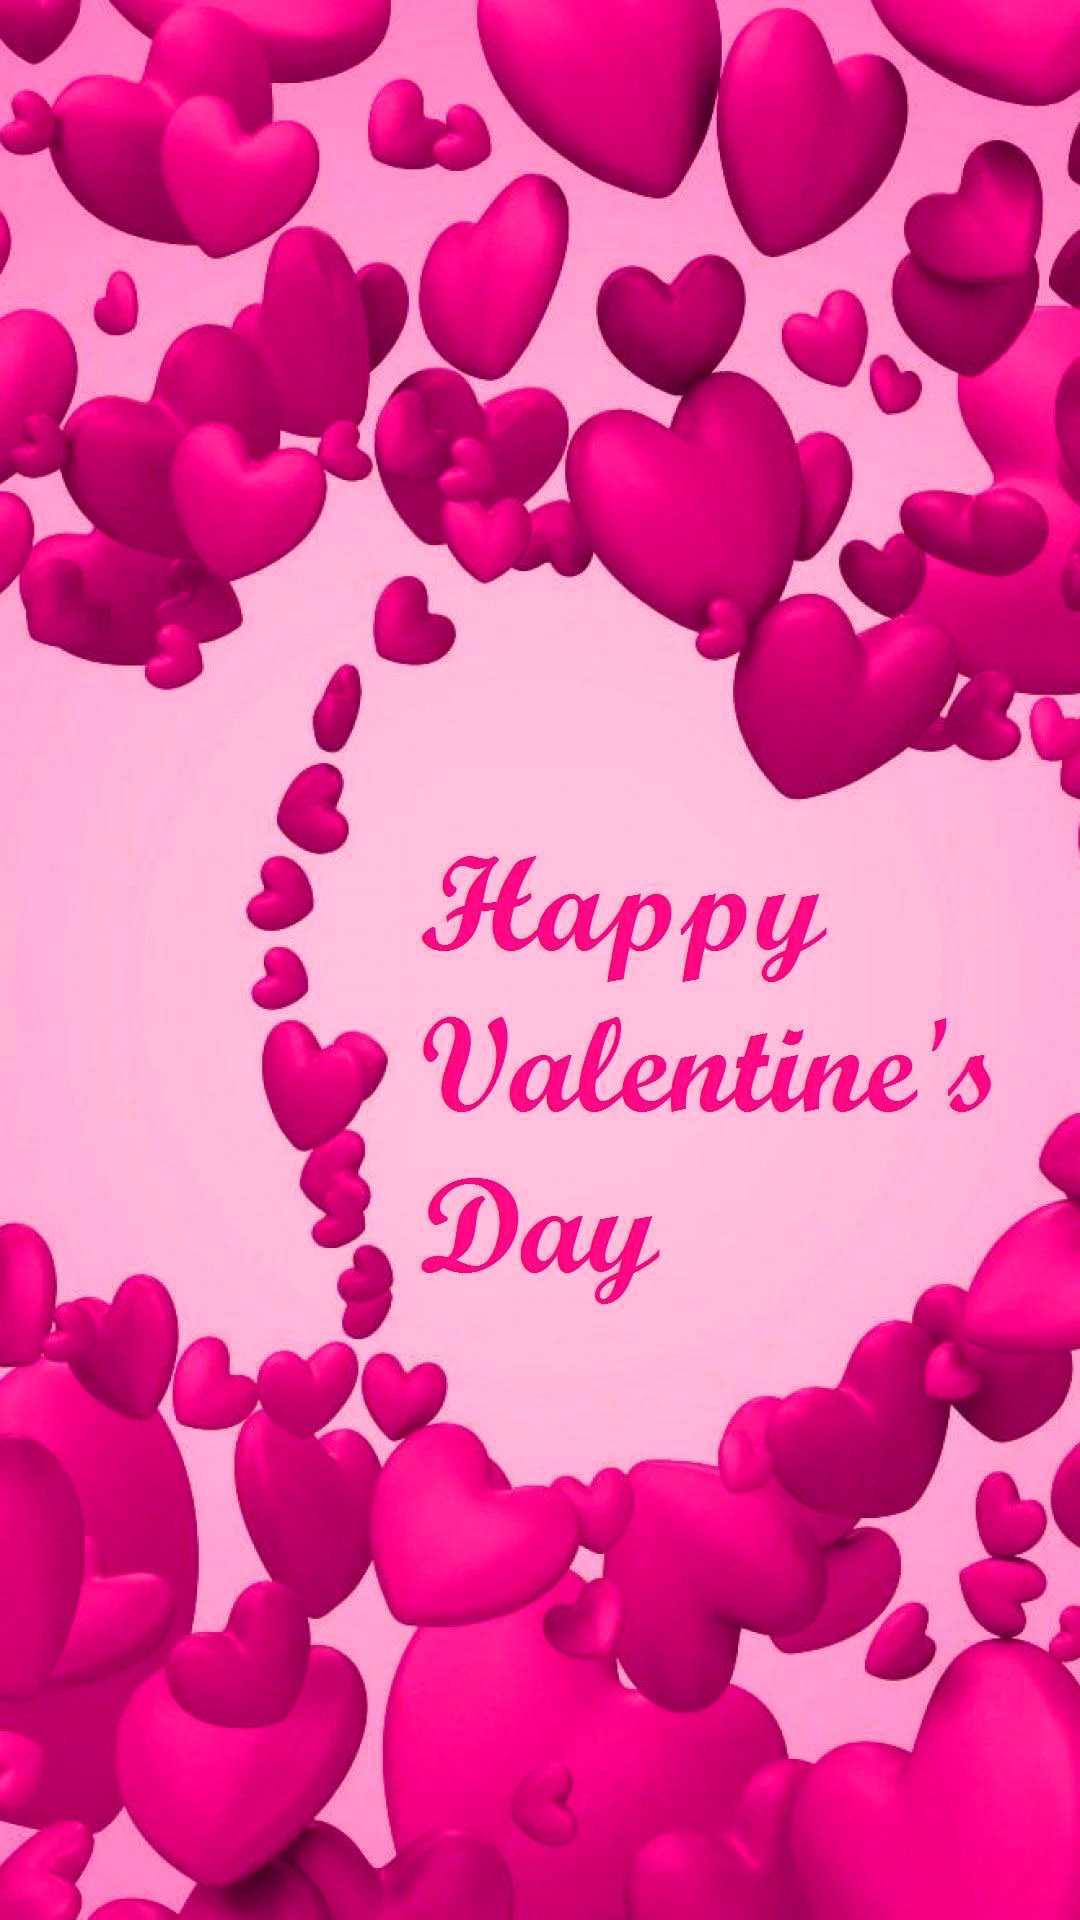 Happy Valentine's Day iPhone Wallpapers Free Download